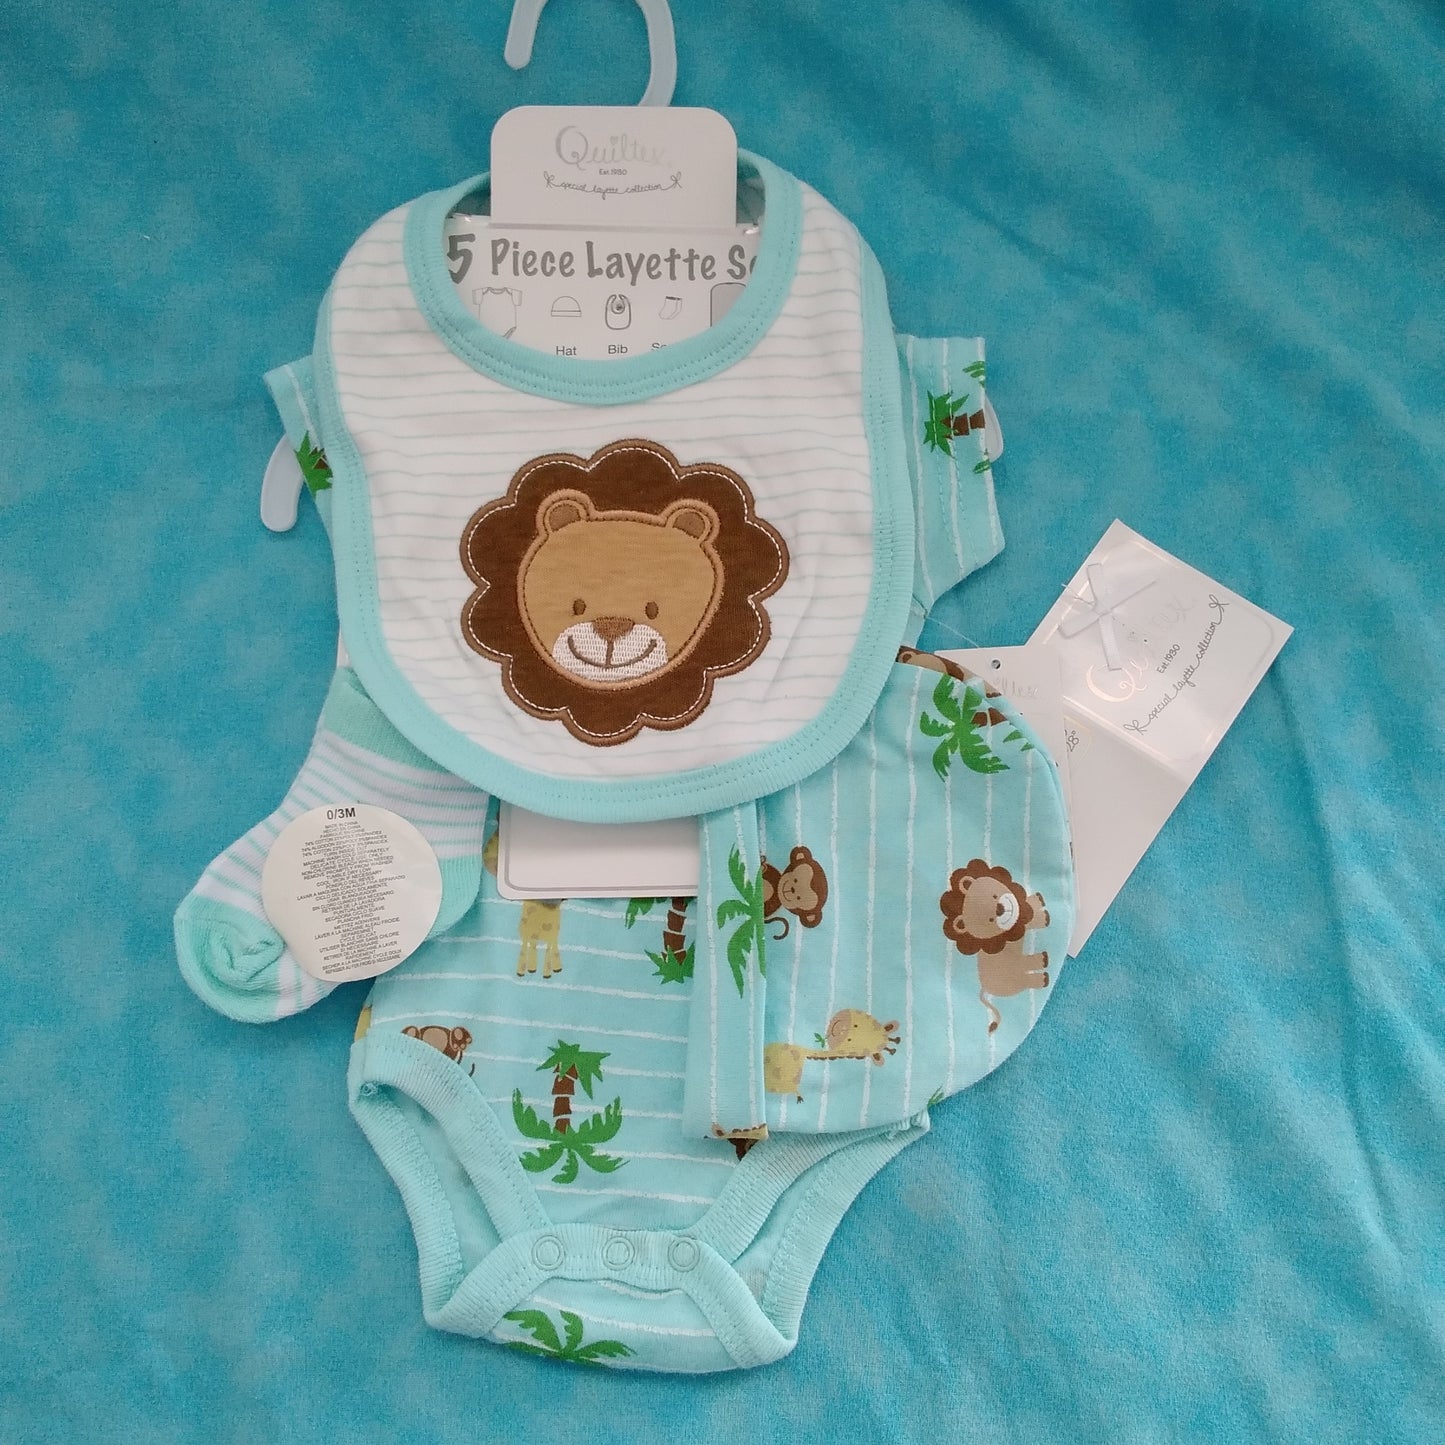 Quiltex Boys 5-Piece Layette Gift Set with Lion - Size: 0-3 months